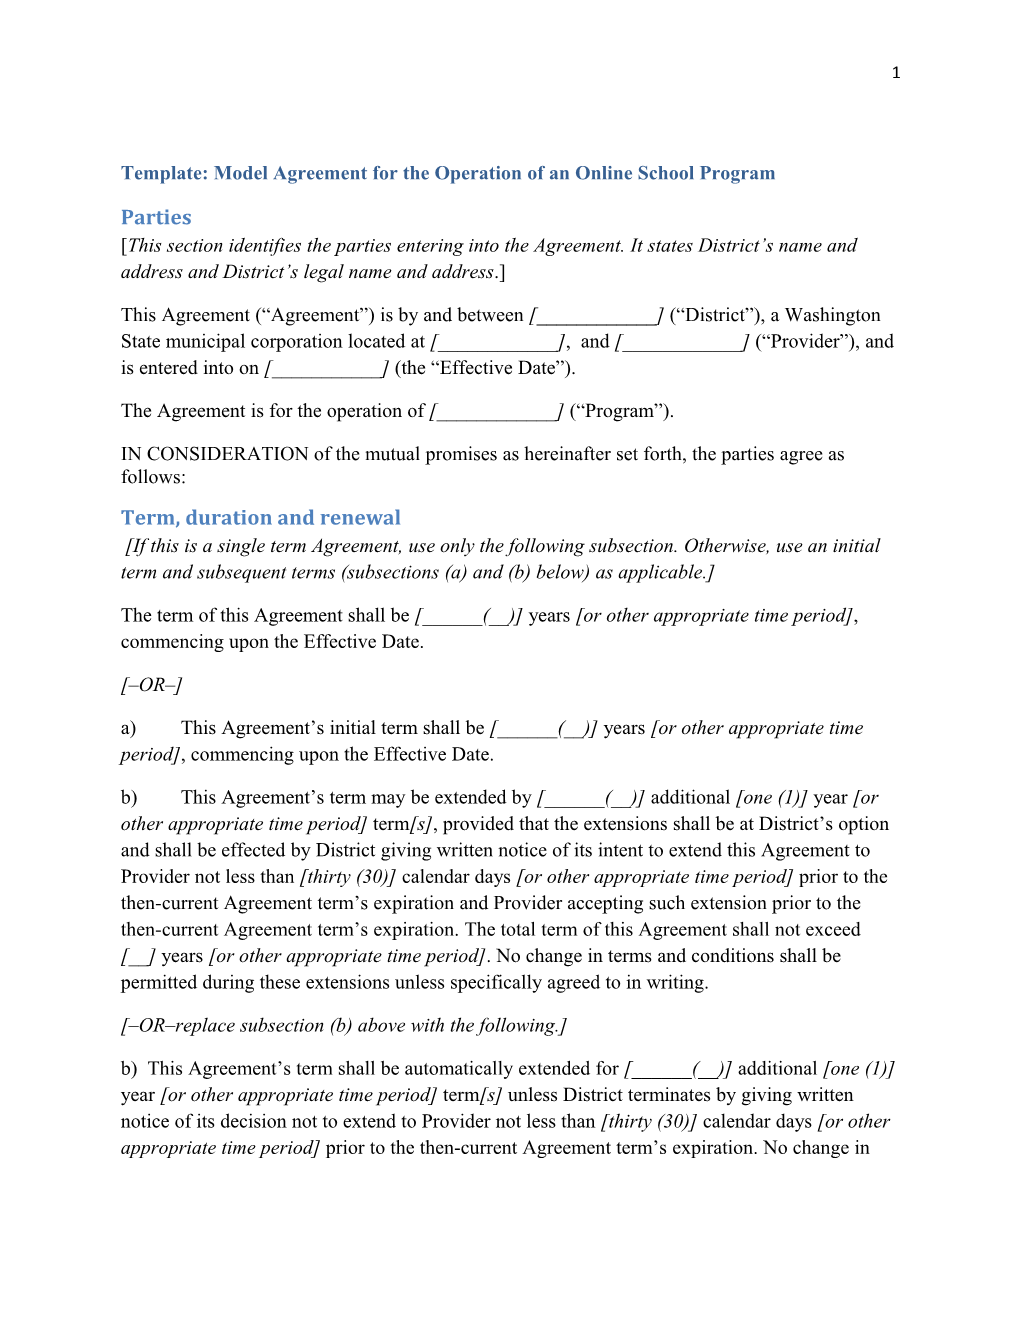 Template: Model Agreement for the Operation of an Online School Program